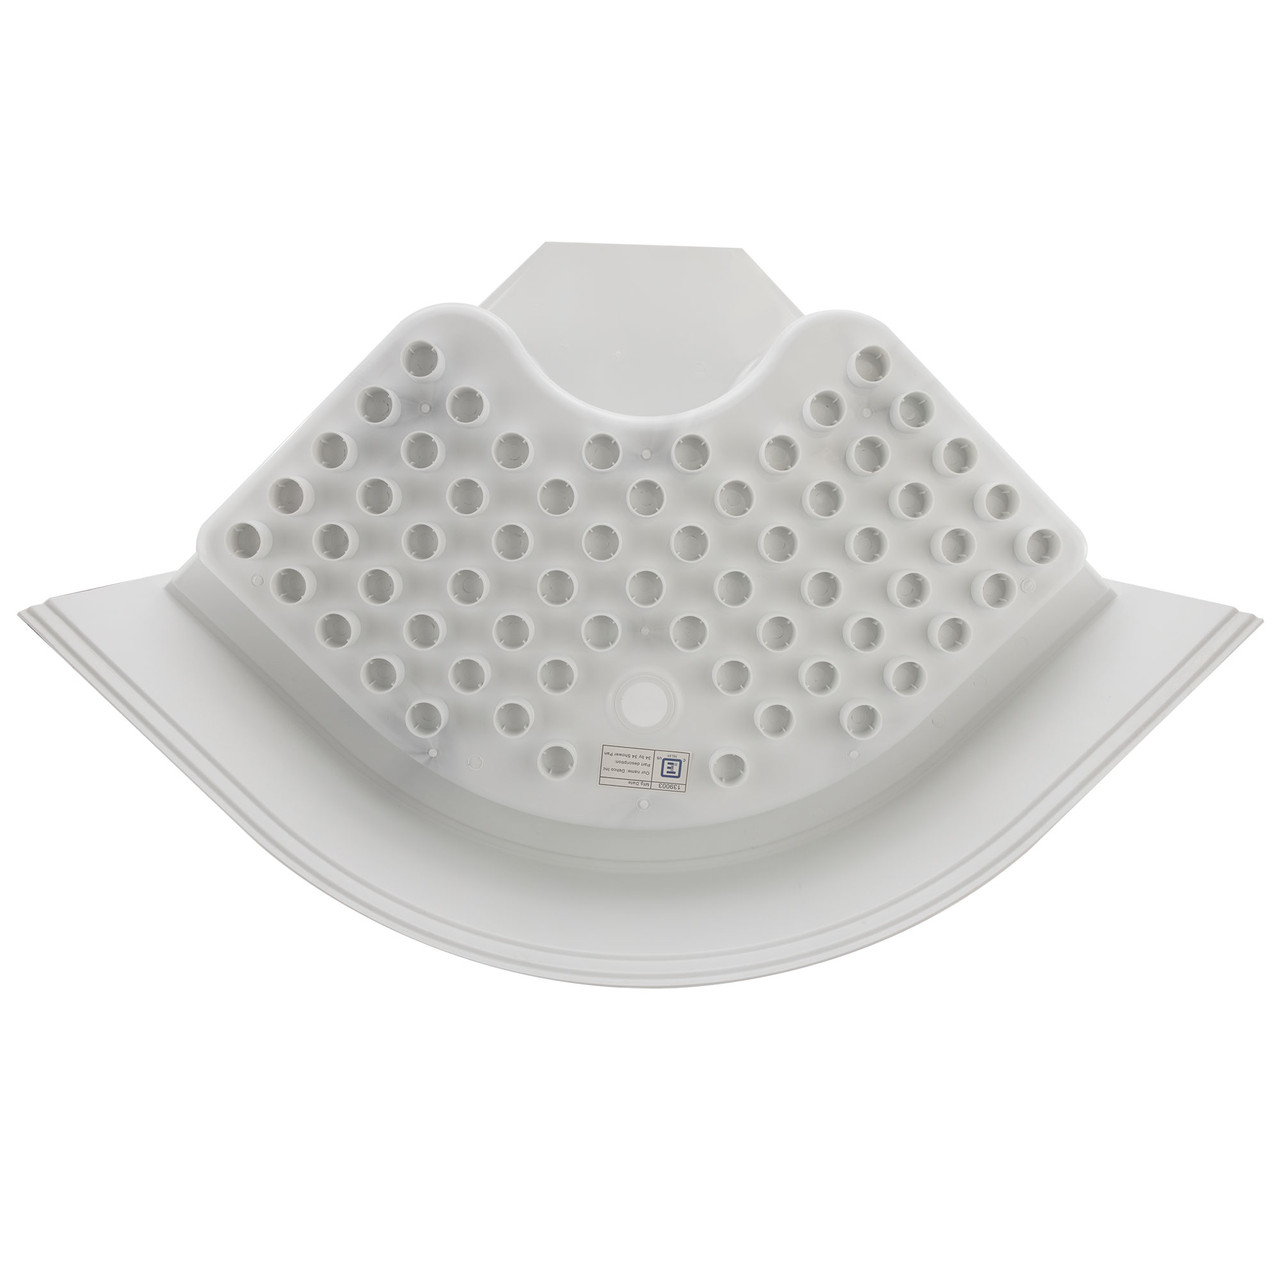 RV Shower Pan 32 x 24 x 5 Right Drain in White - RecPro